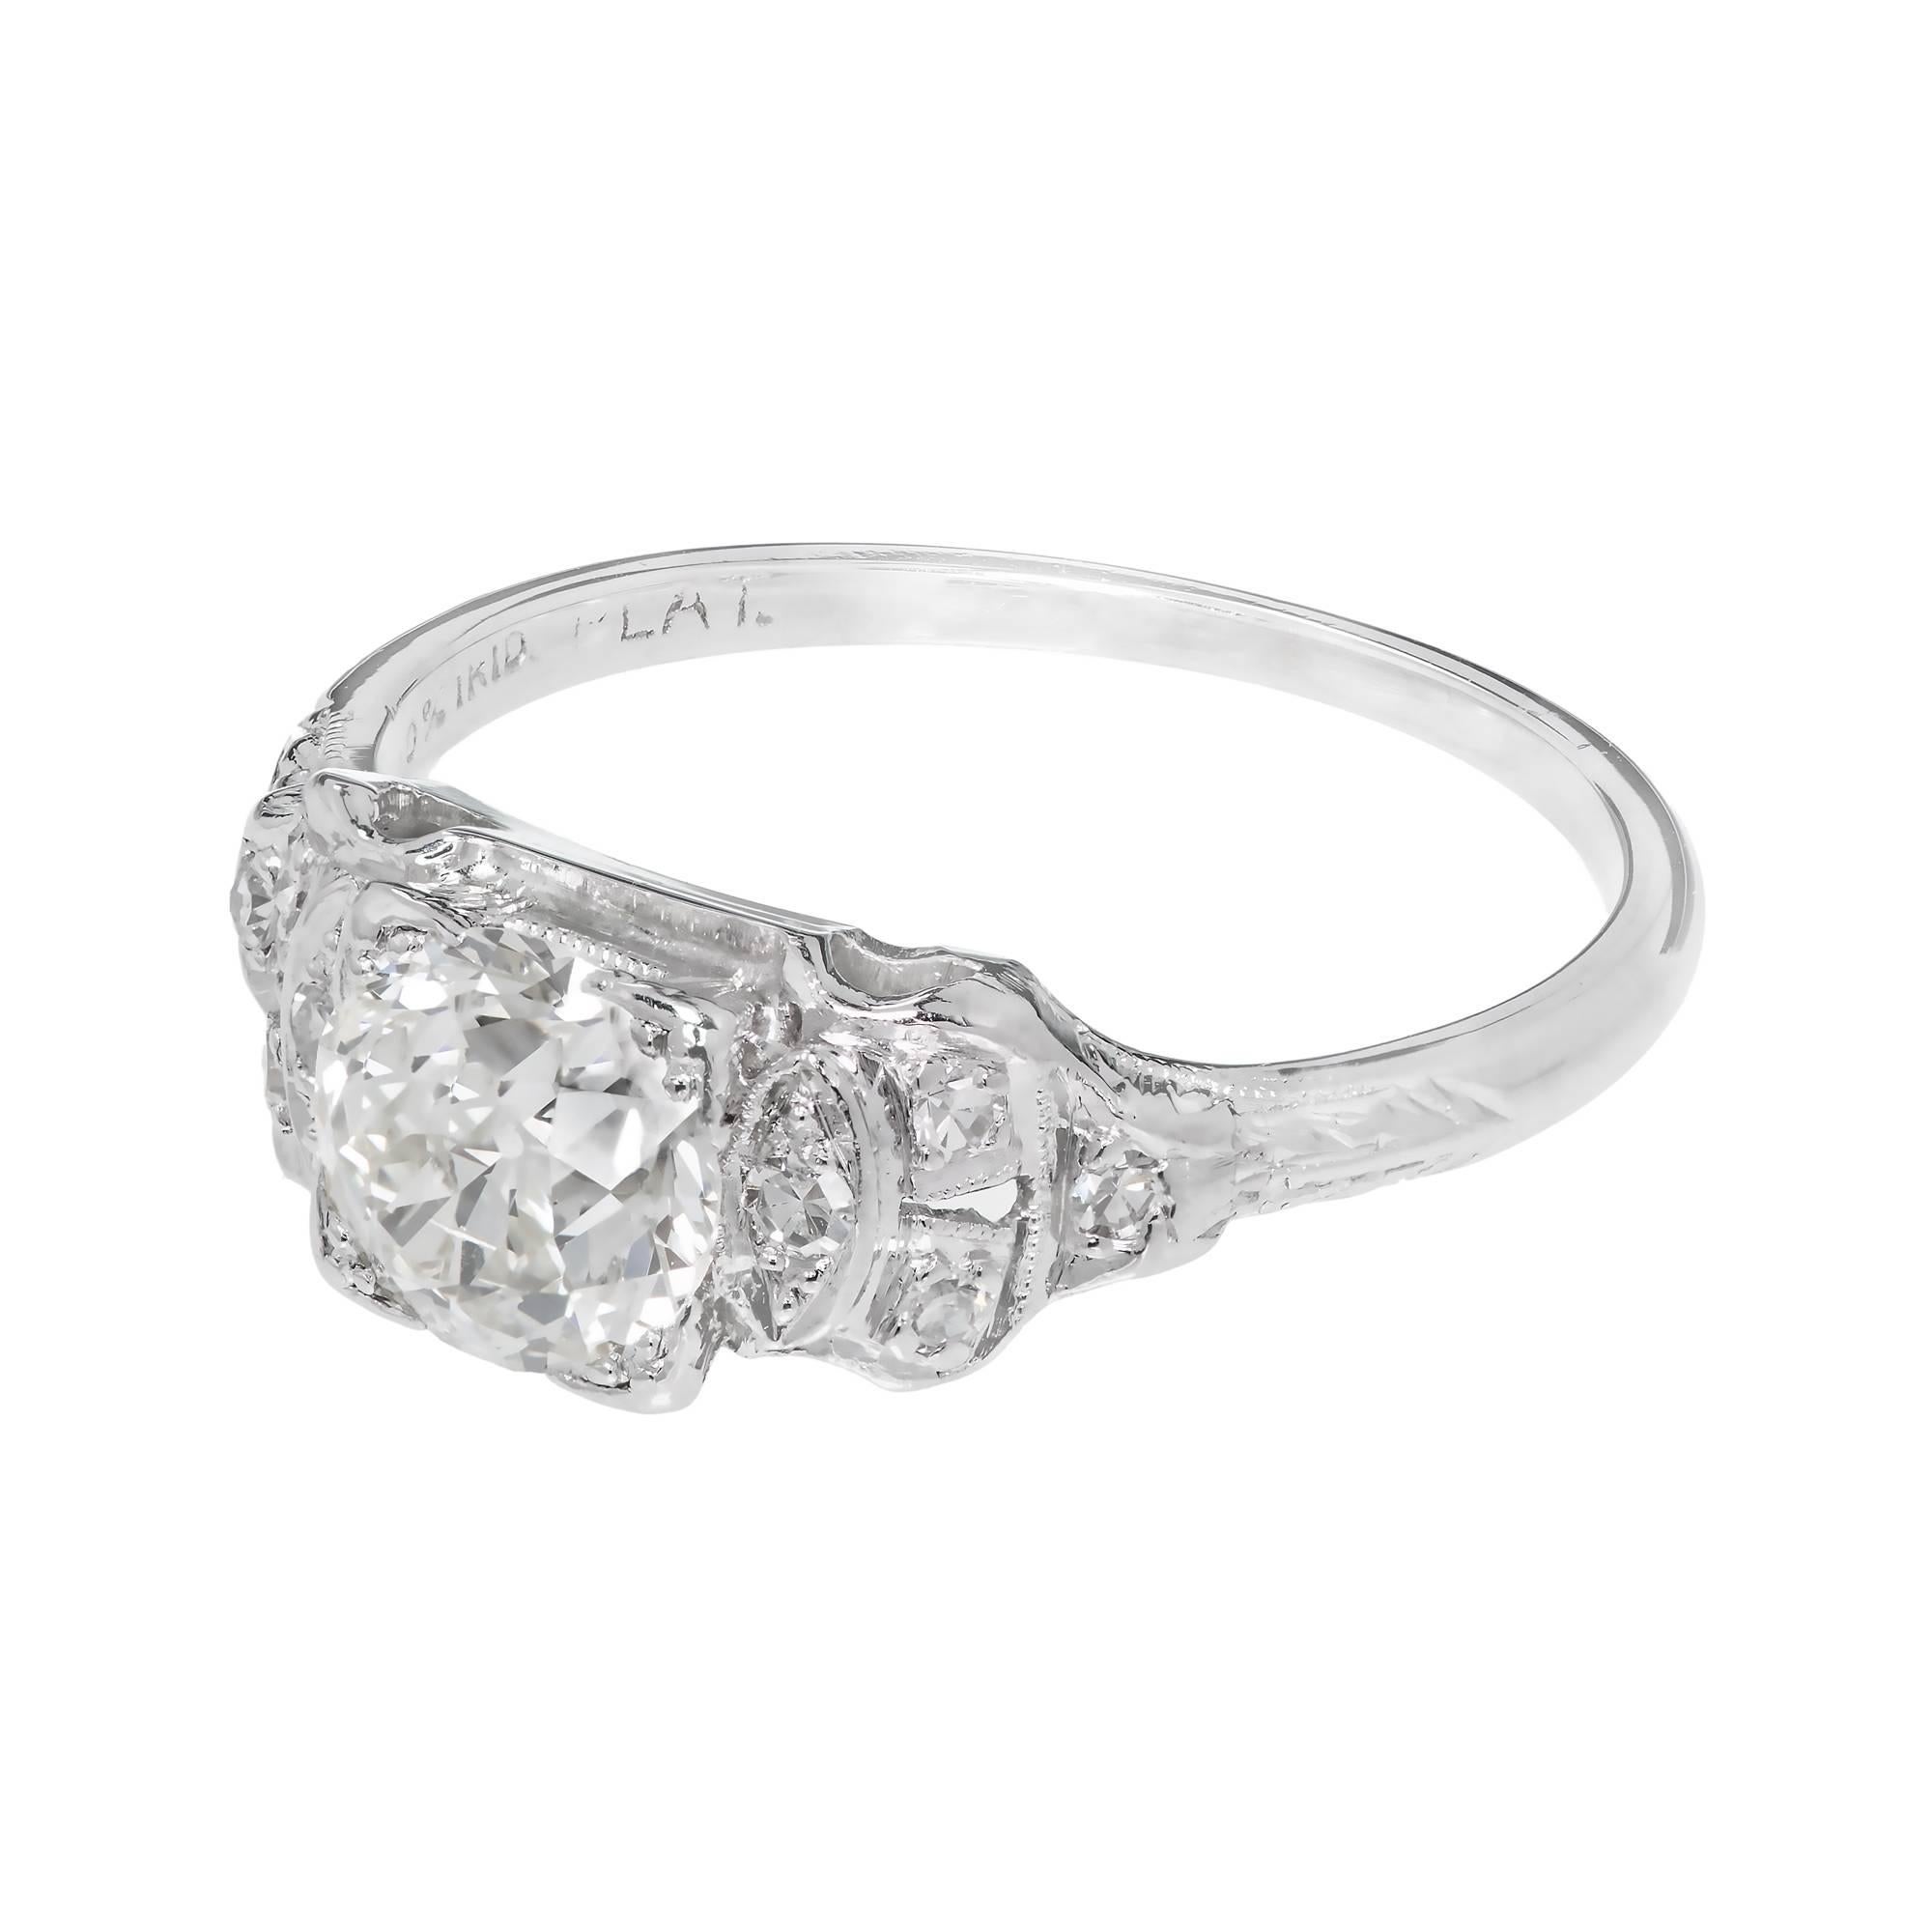 Art Deco 1920’s Platinum ring set with one old European cut diamond engagement ring 0.91ct, faces up white with just a hint of body color, extra sparkly with raised crown and small table with single cut accent diamonds. 

1 old European cut diamond,